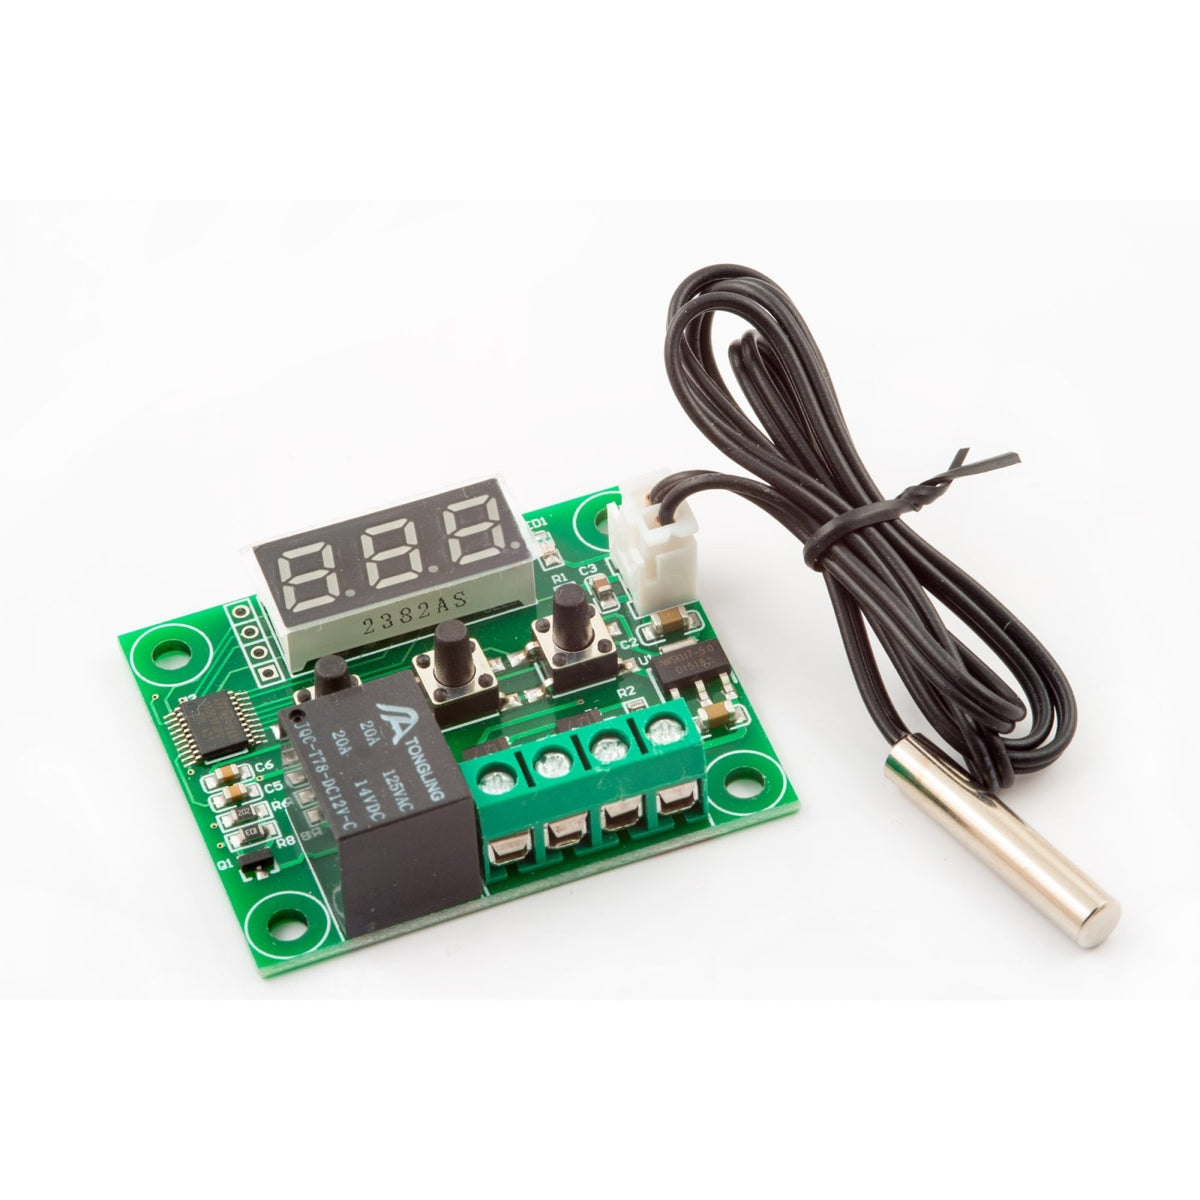 12V Temperature Controller Switch with Probe 20A Thermostat Control -UK